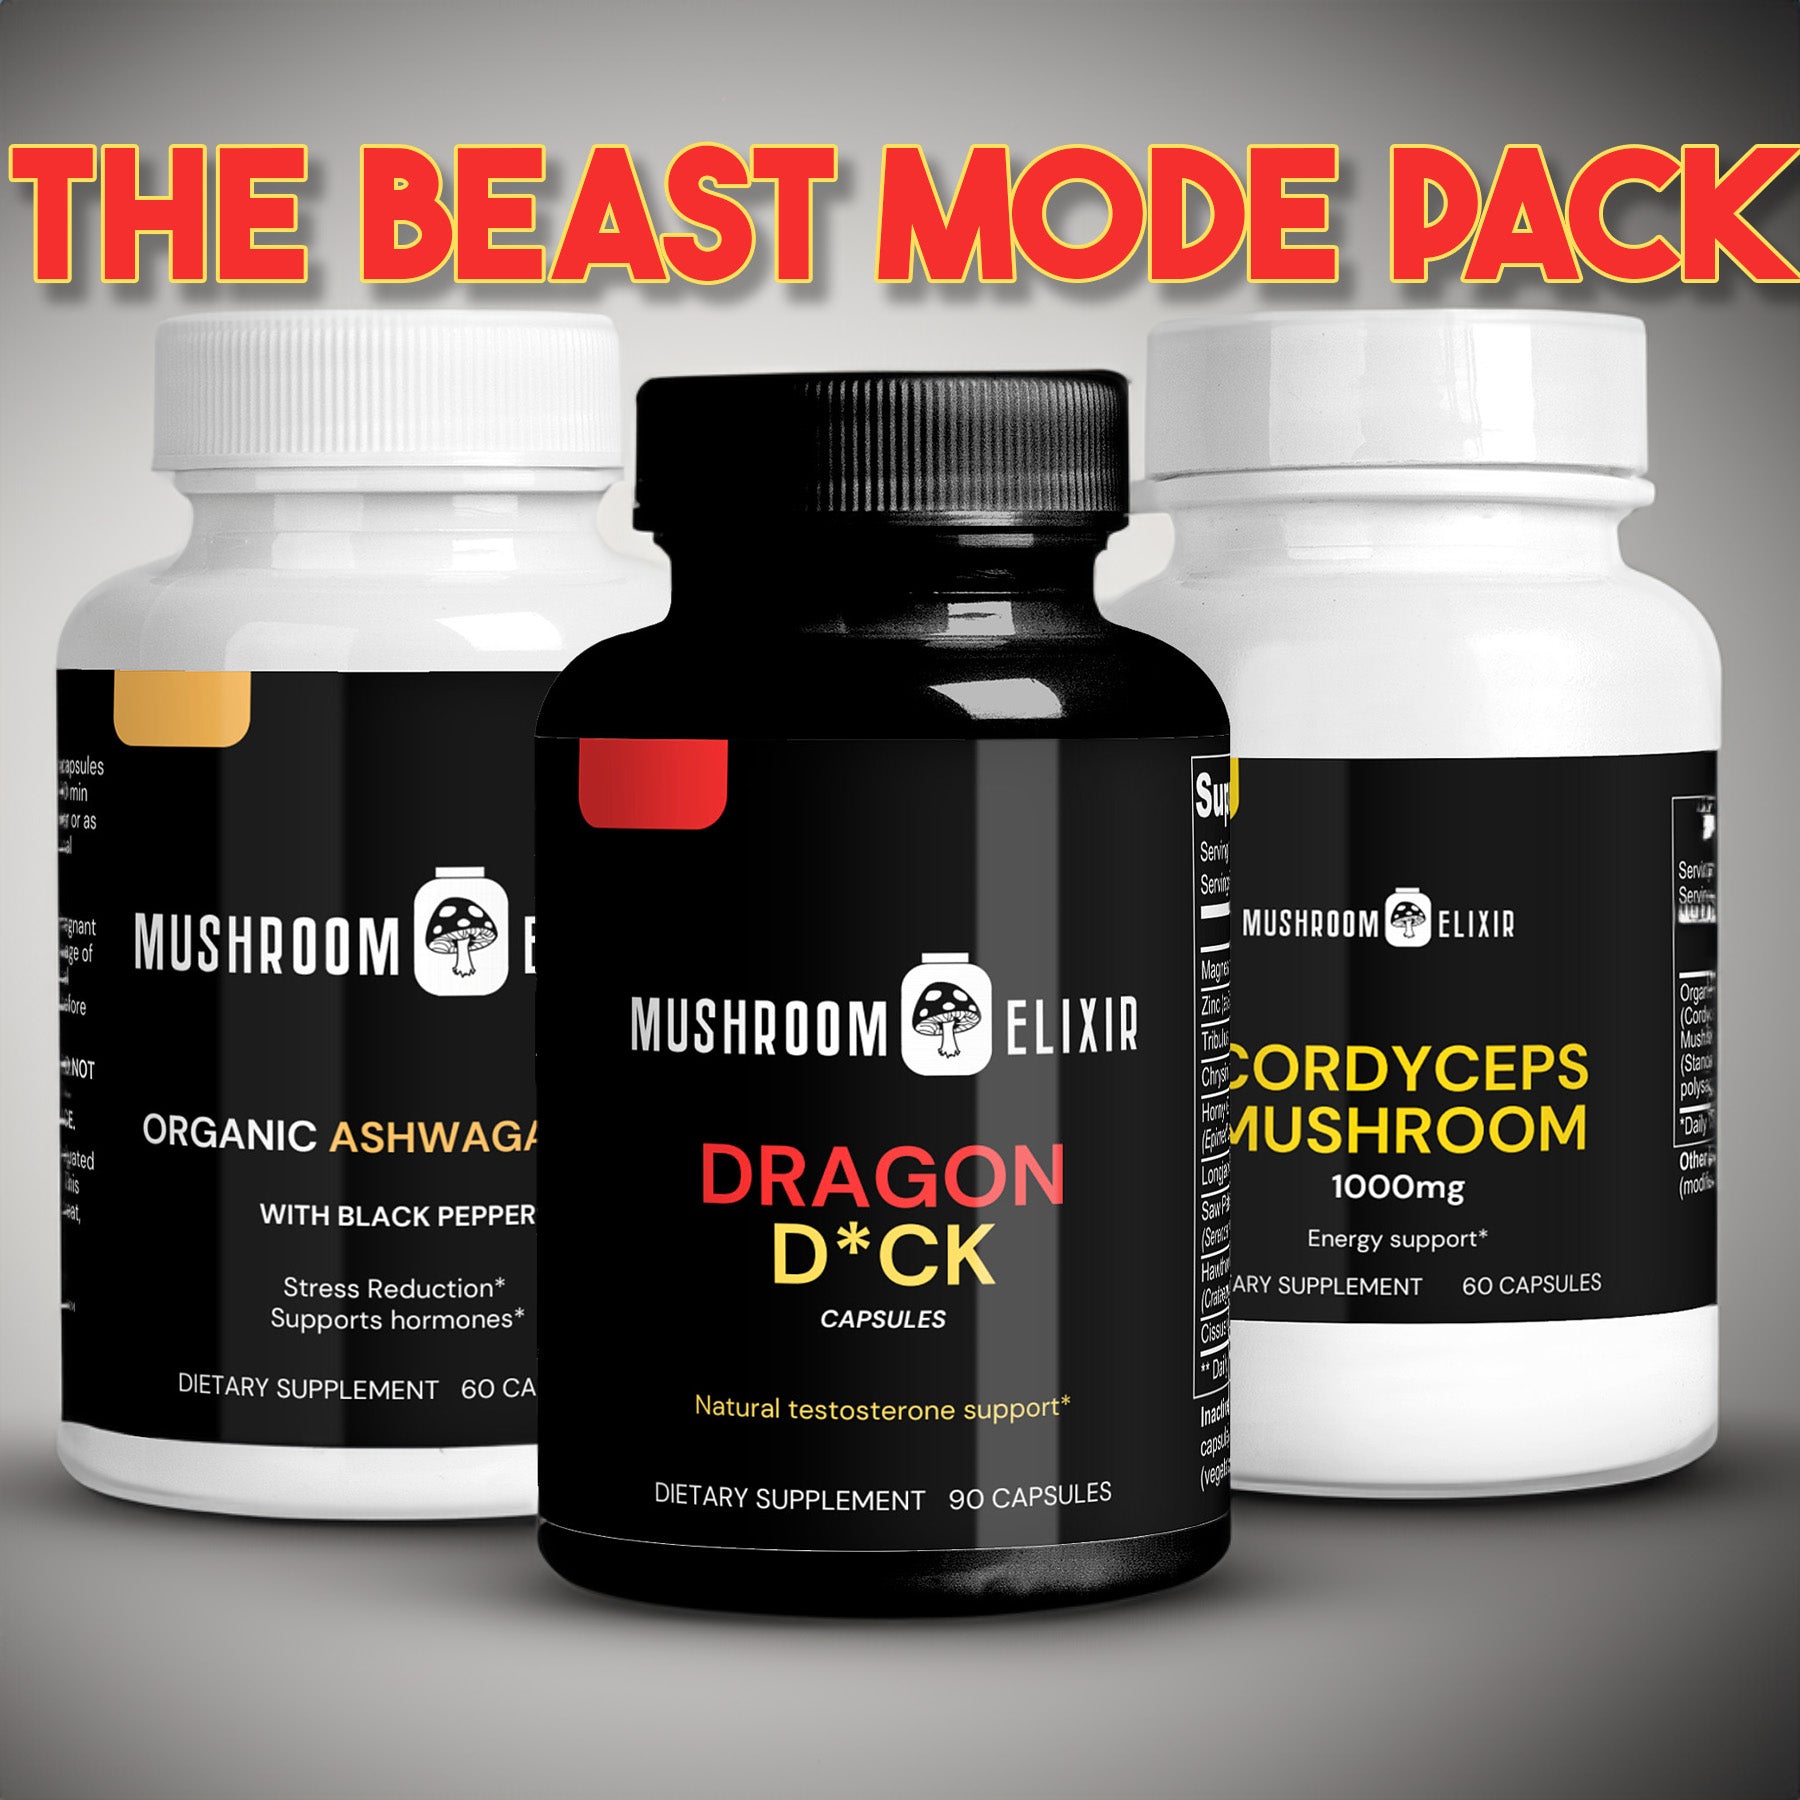 The Beast Mode Pack